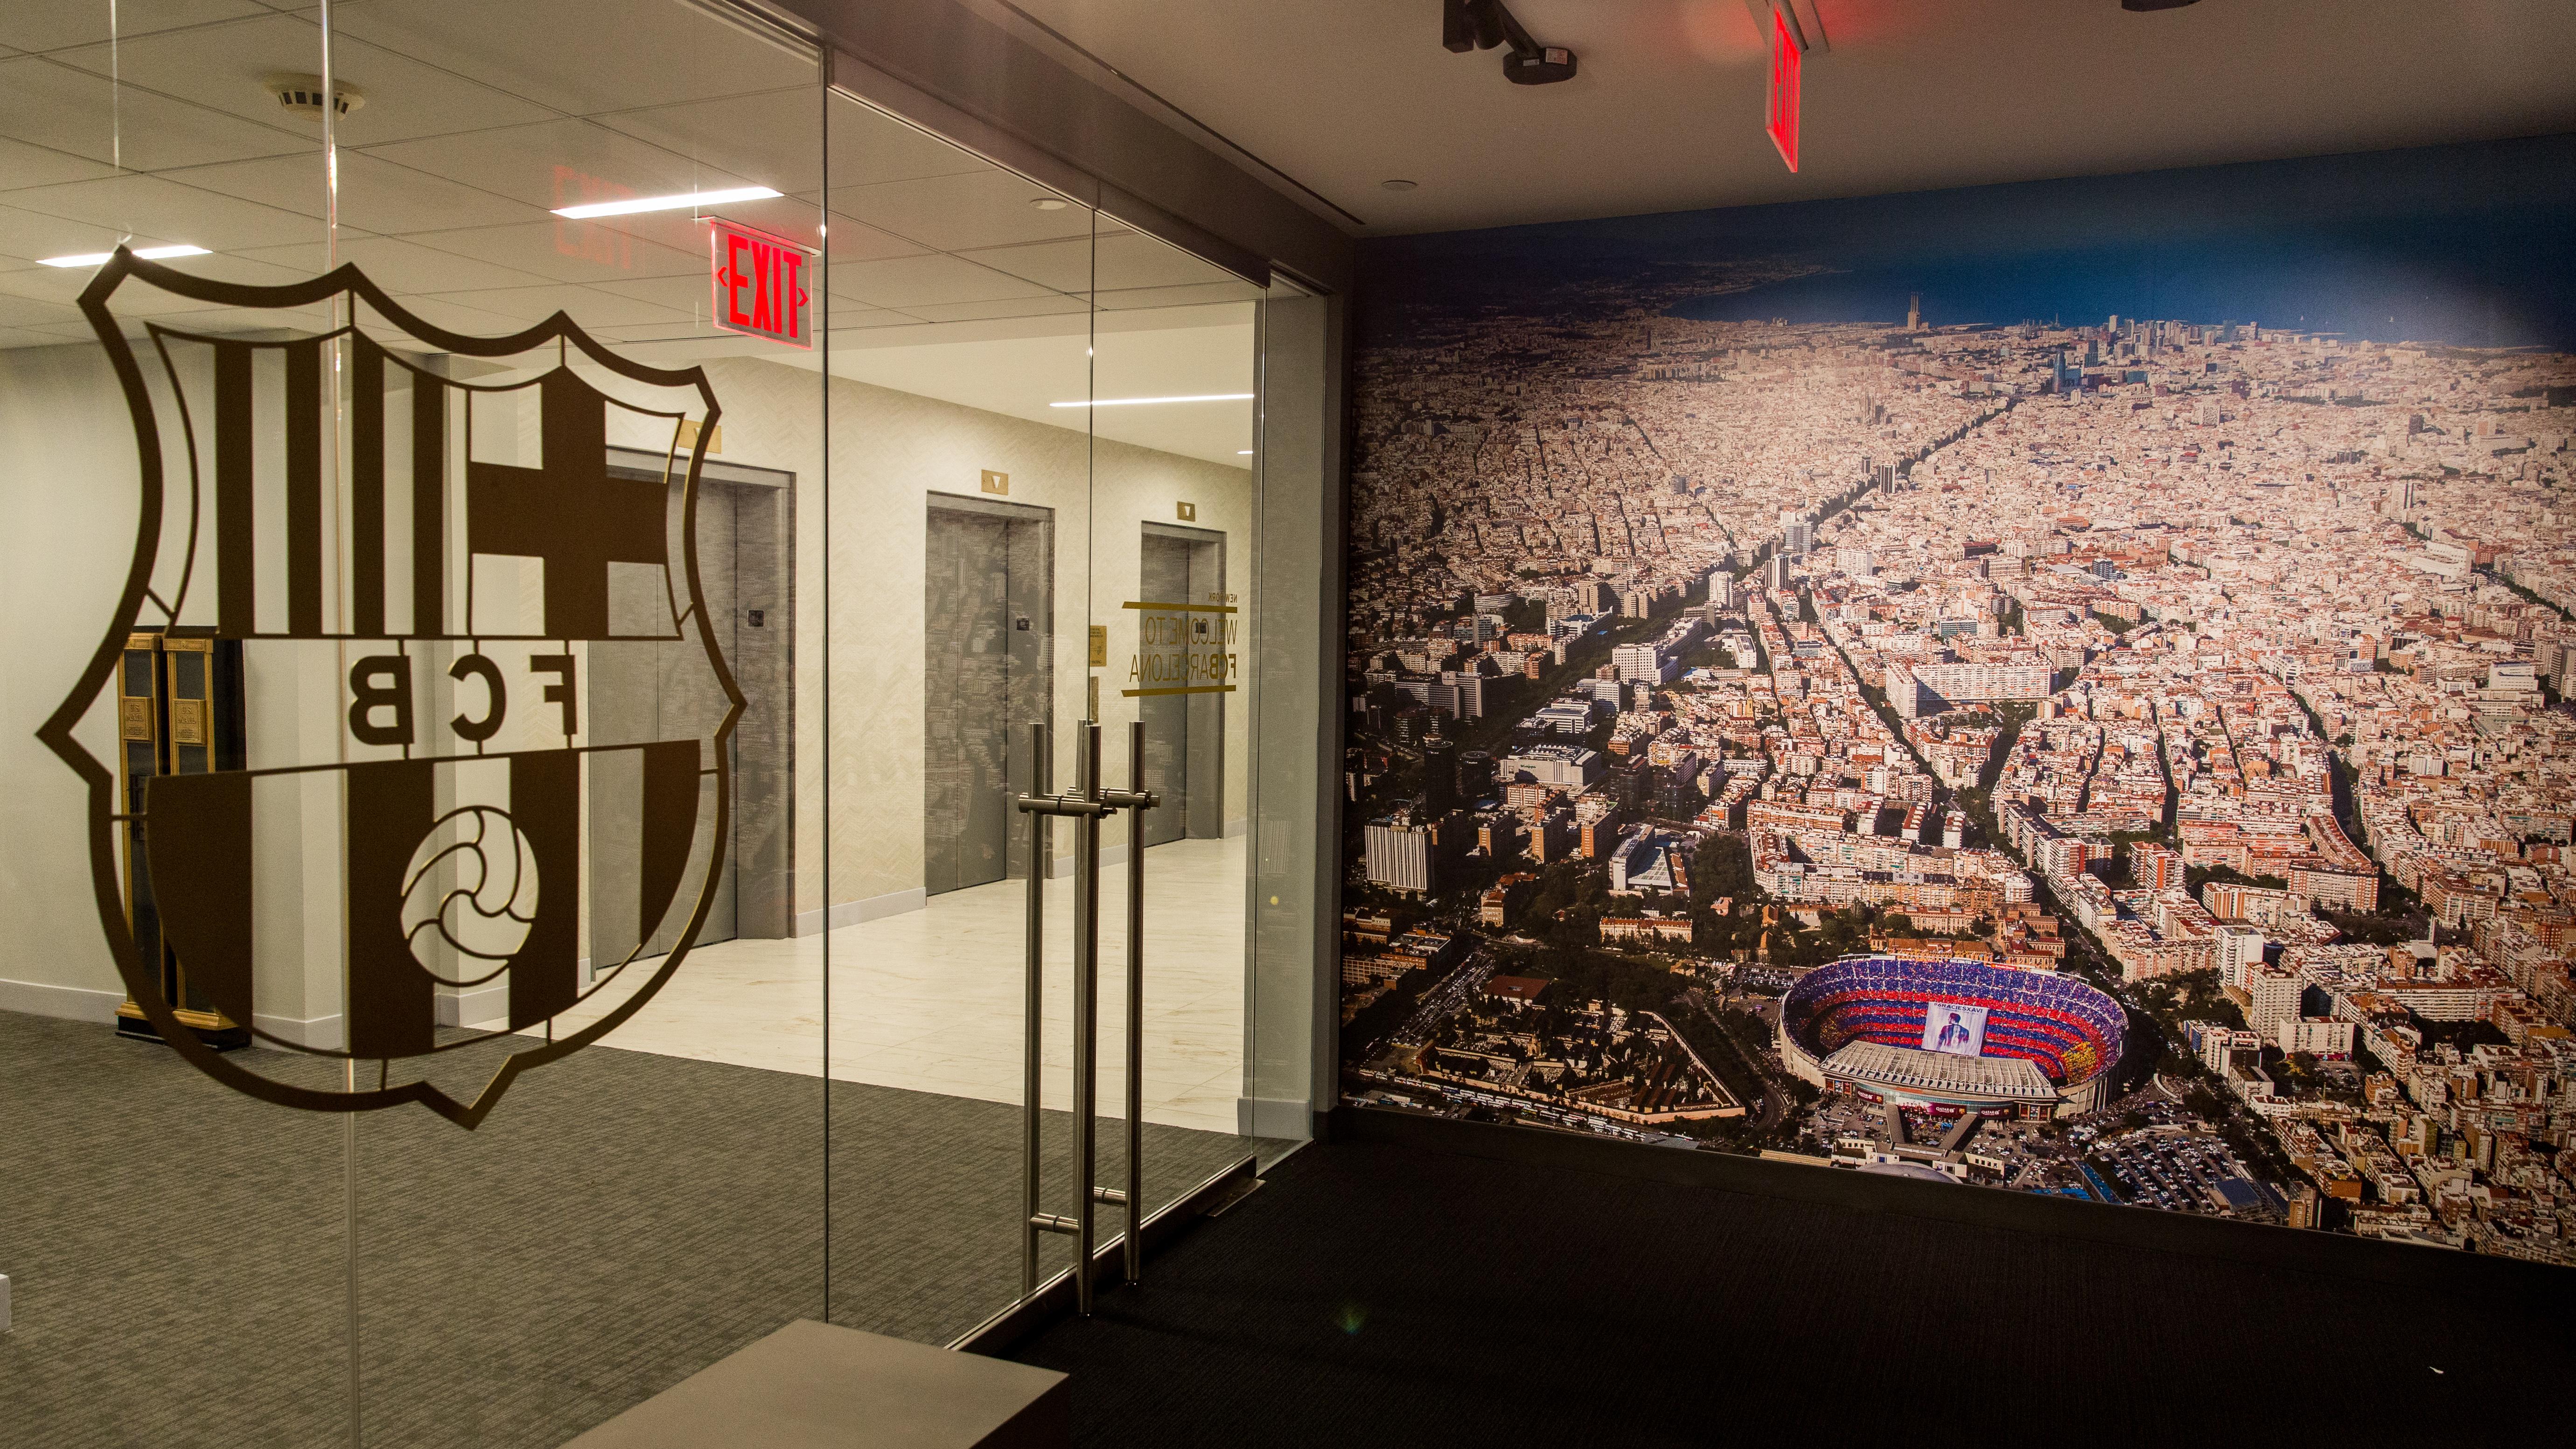 FC Barcelona's office in the United States